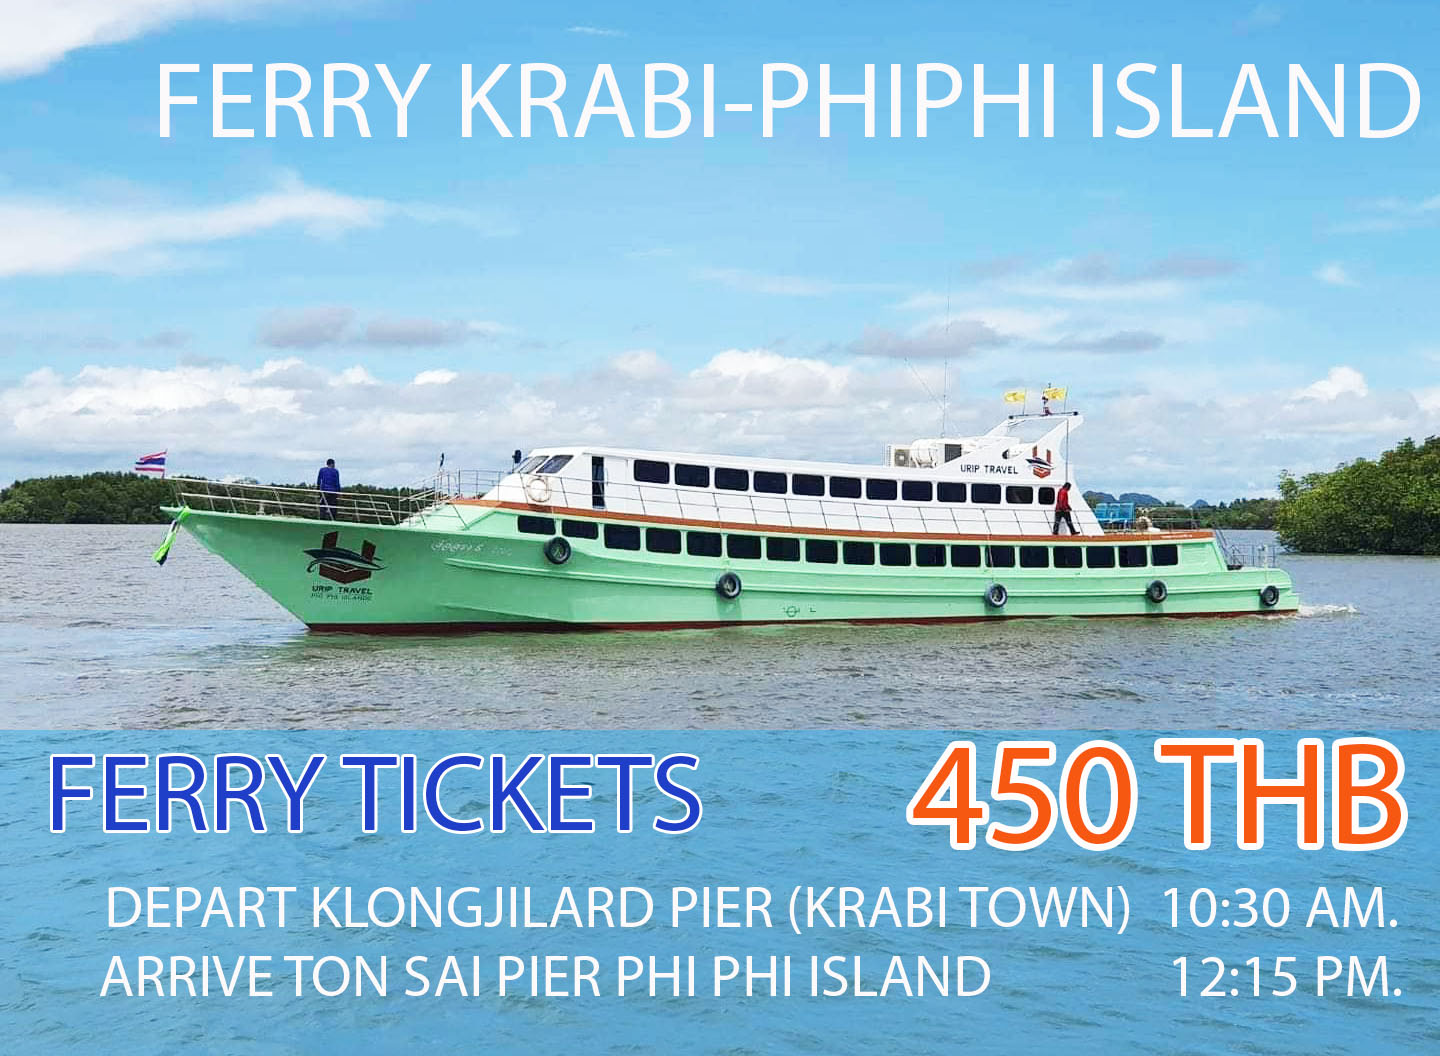 Ferry Tickets Krabi - Phi Phi island  Departure Time 10:30 AM.